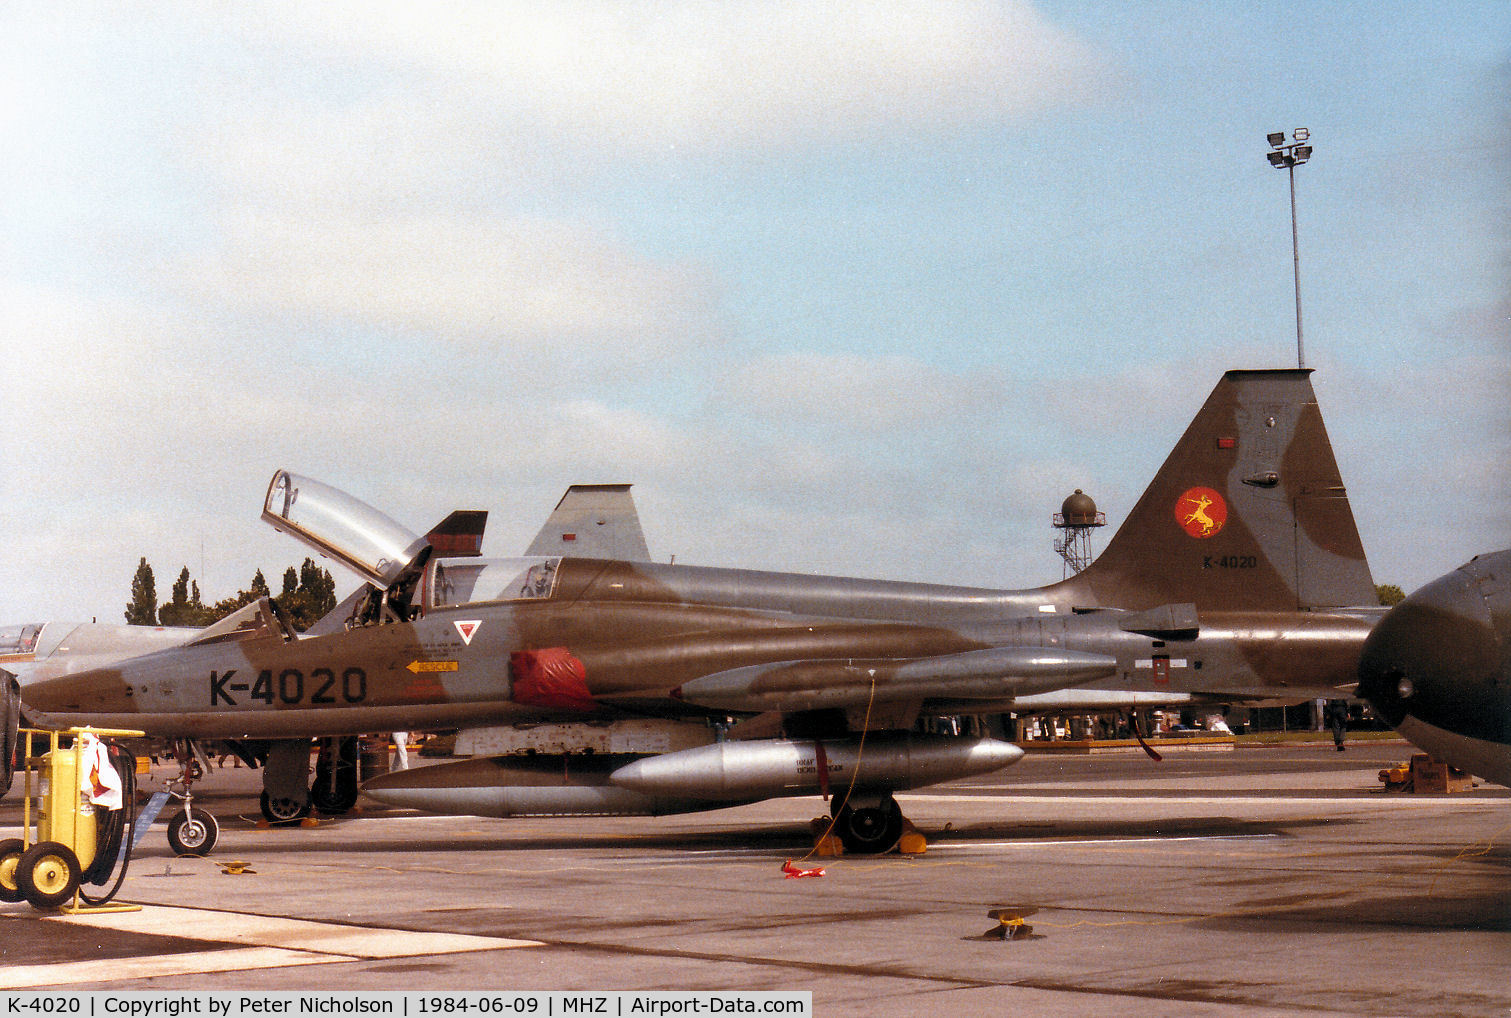 K-4020, 1971 Canadair NF-5B Freedom Fighter C/N 4020, NF-5B Freedom Fighter of 314 Squadron Royal Netherlands Air Force on display at the 1984 RAF Mildenhall Air Fete.